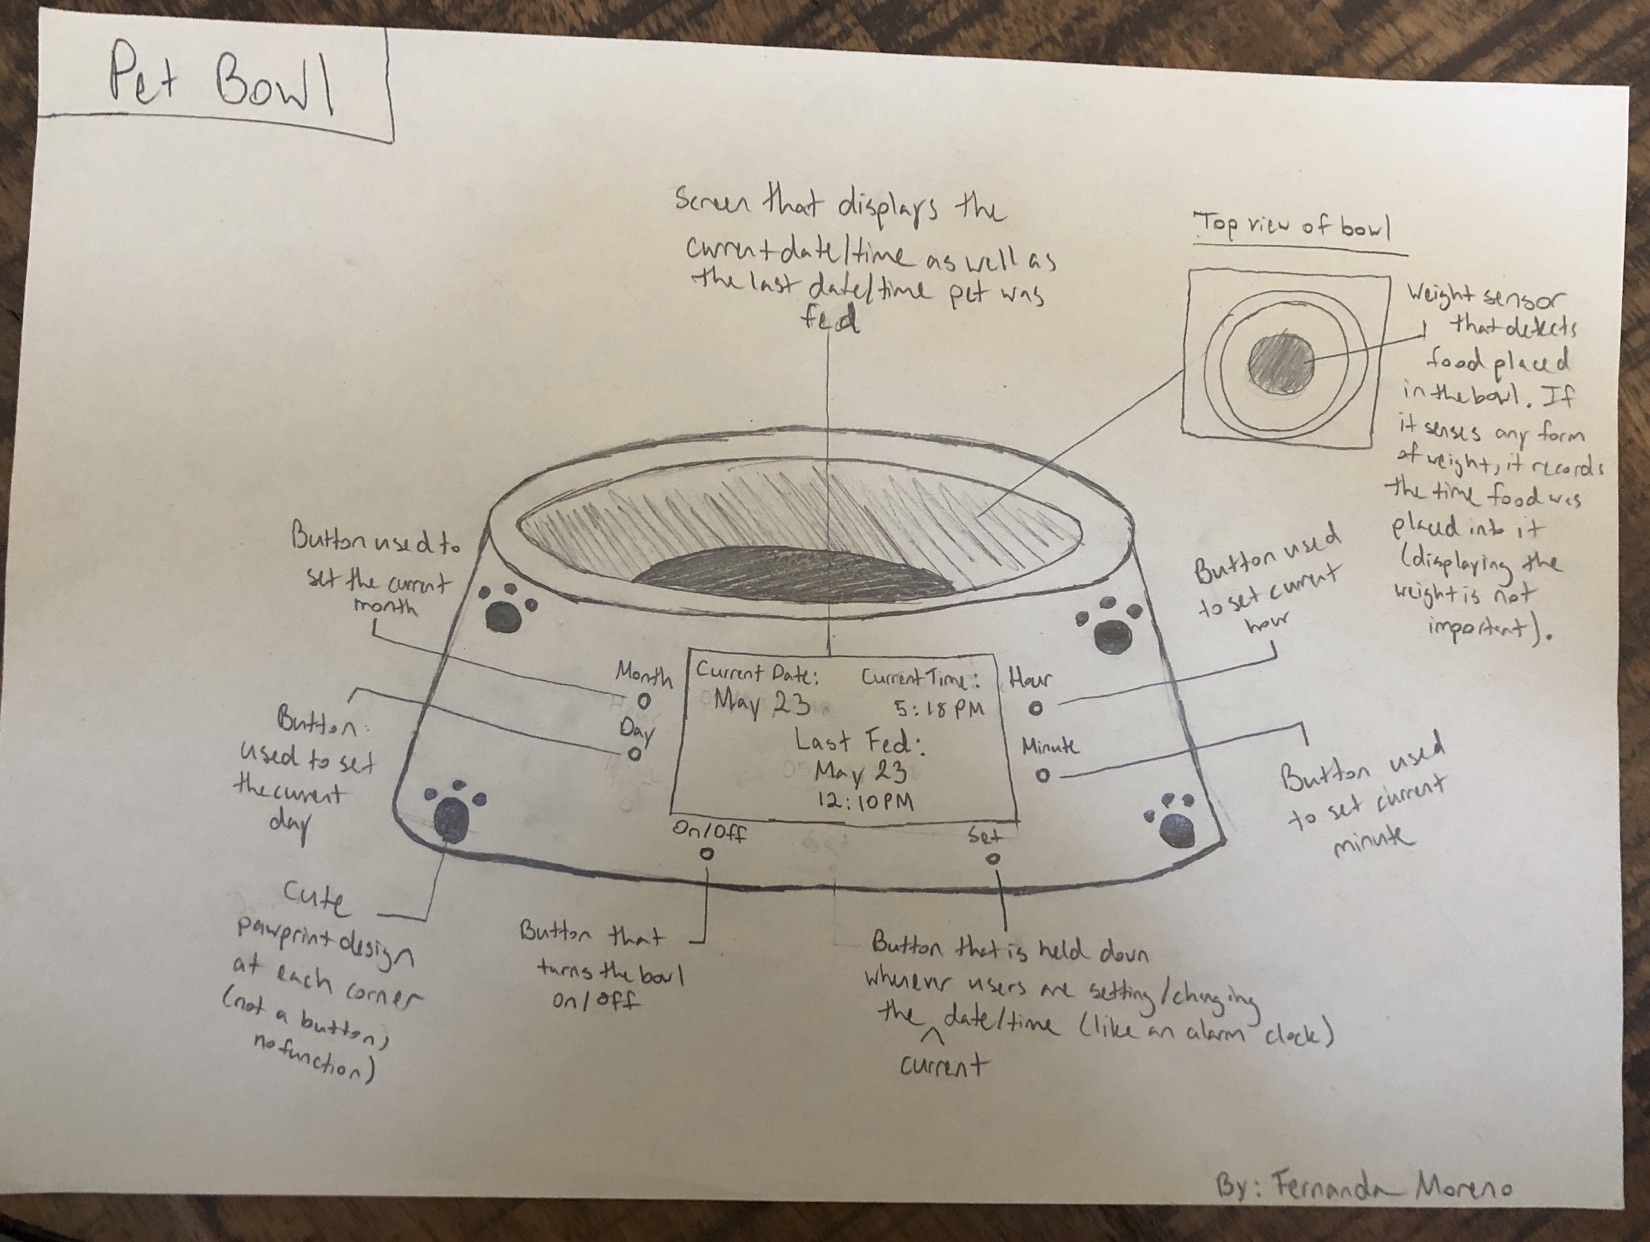 Sketch of physical pet bowl and functionality description